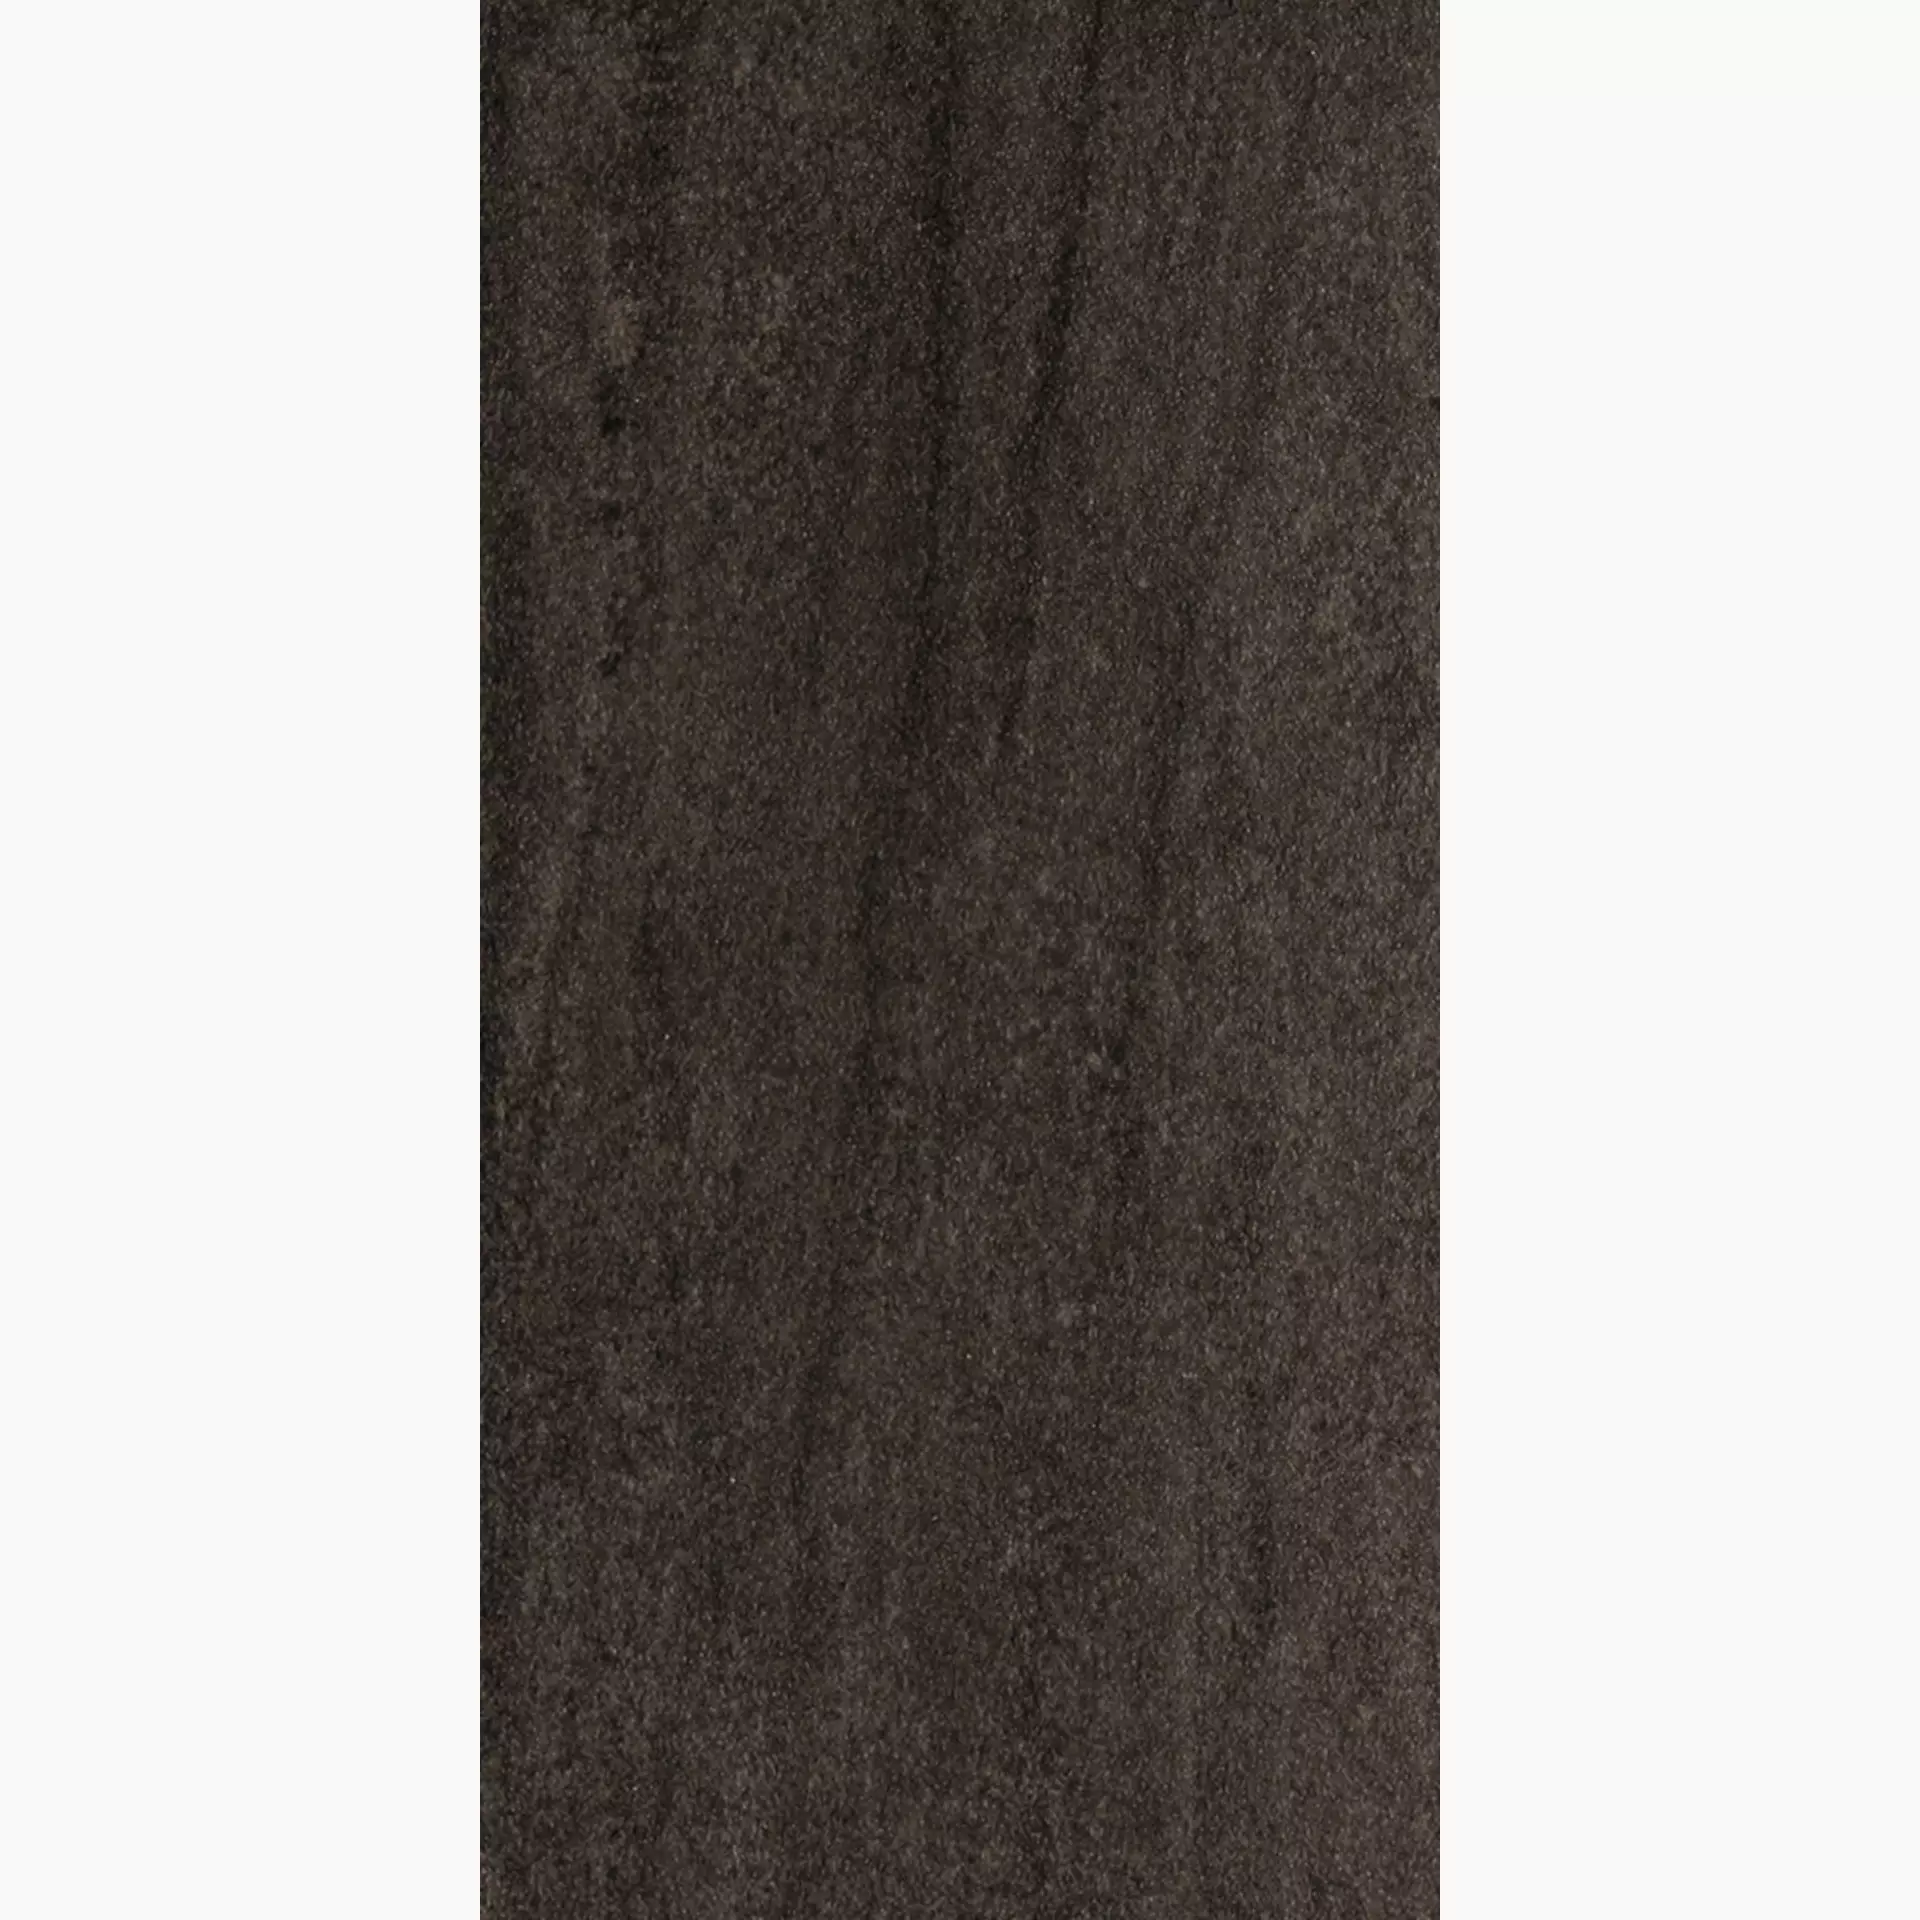 Rondine Contract Anthracite Naturale J83700 30,5x60,5cm 9,5mm